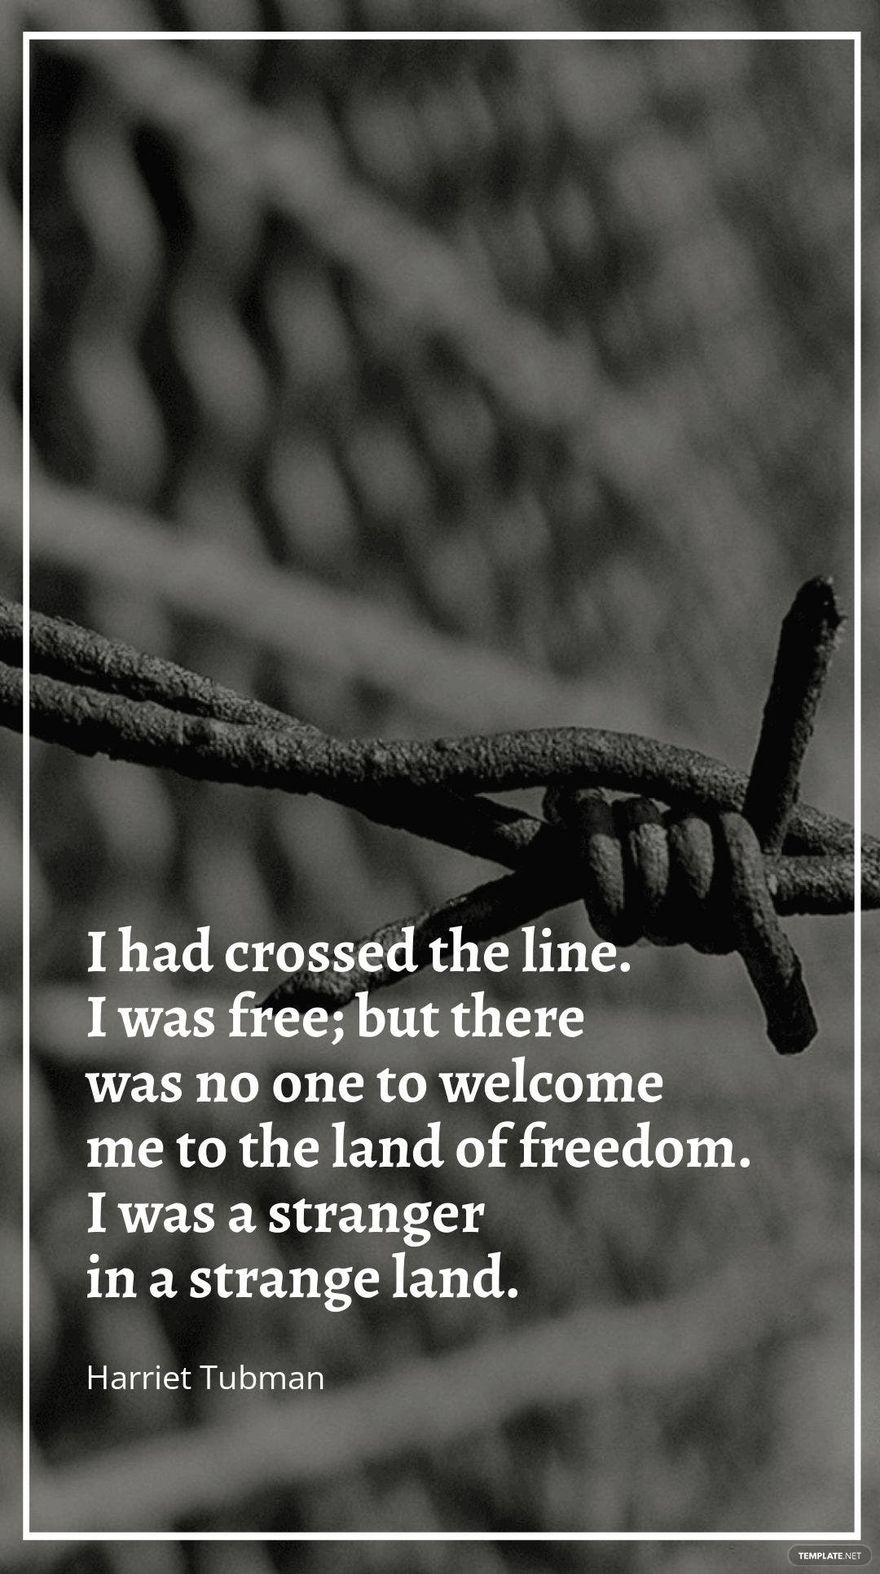 Free Harriet Tubman - I had crossed the line. I was free; but there was no one to welcome me to the land of freedom. I was a stranger in a strange land. in JPG